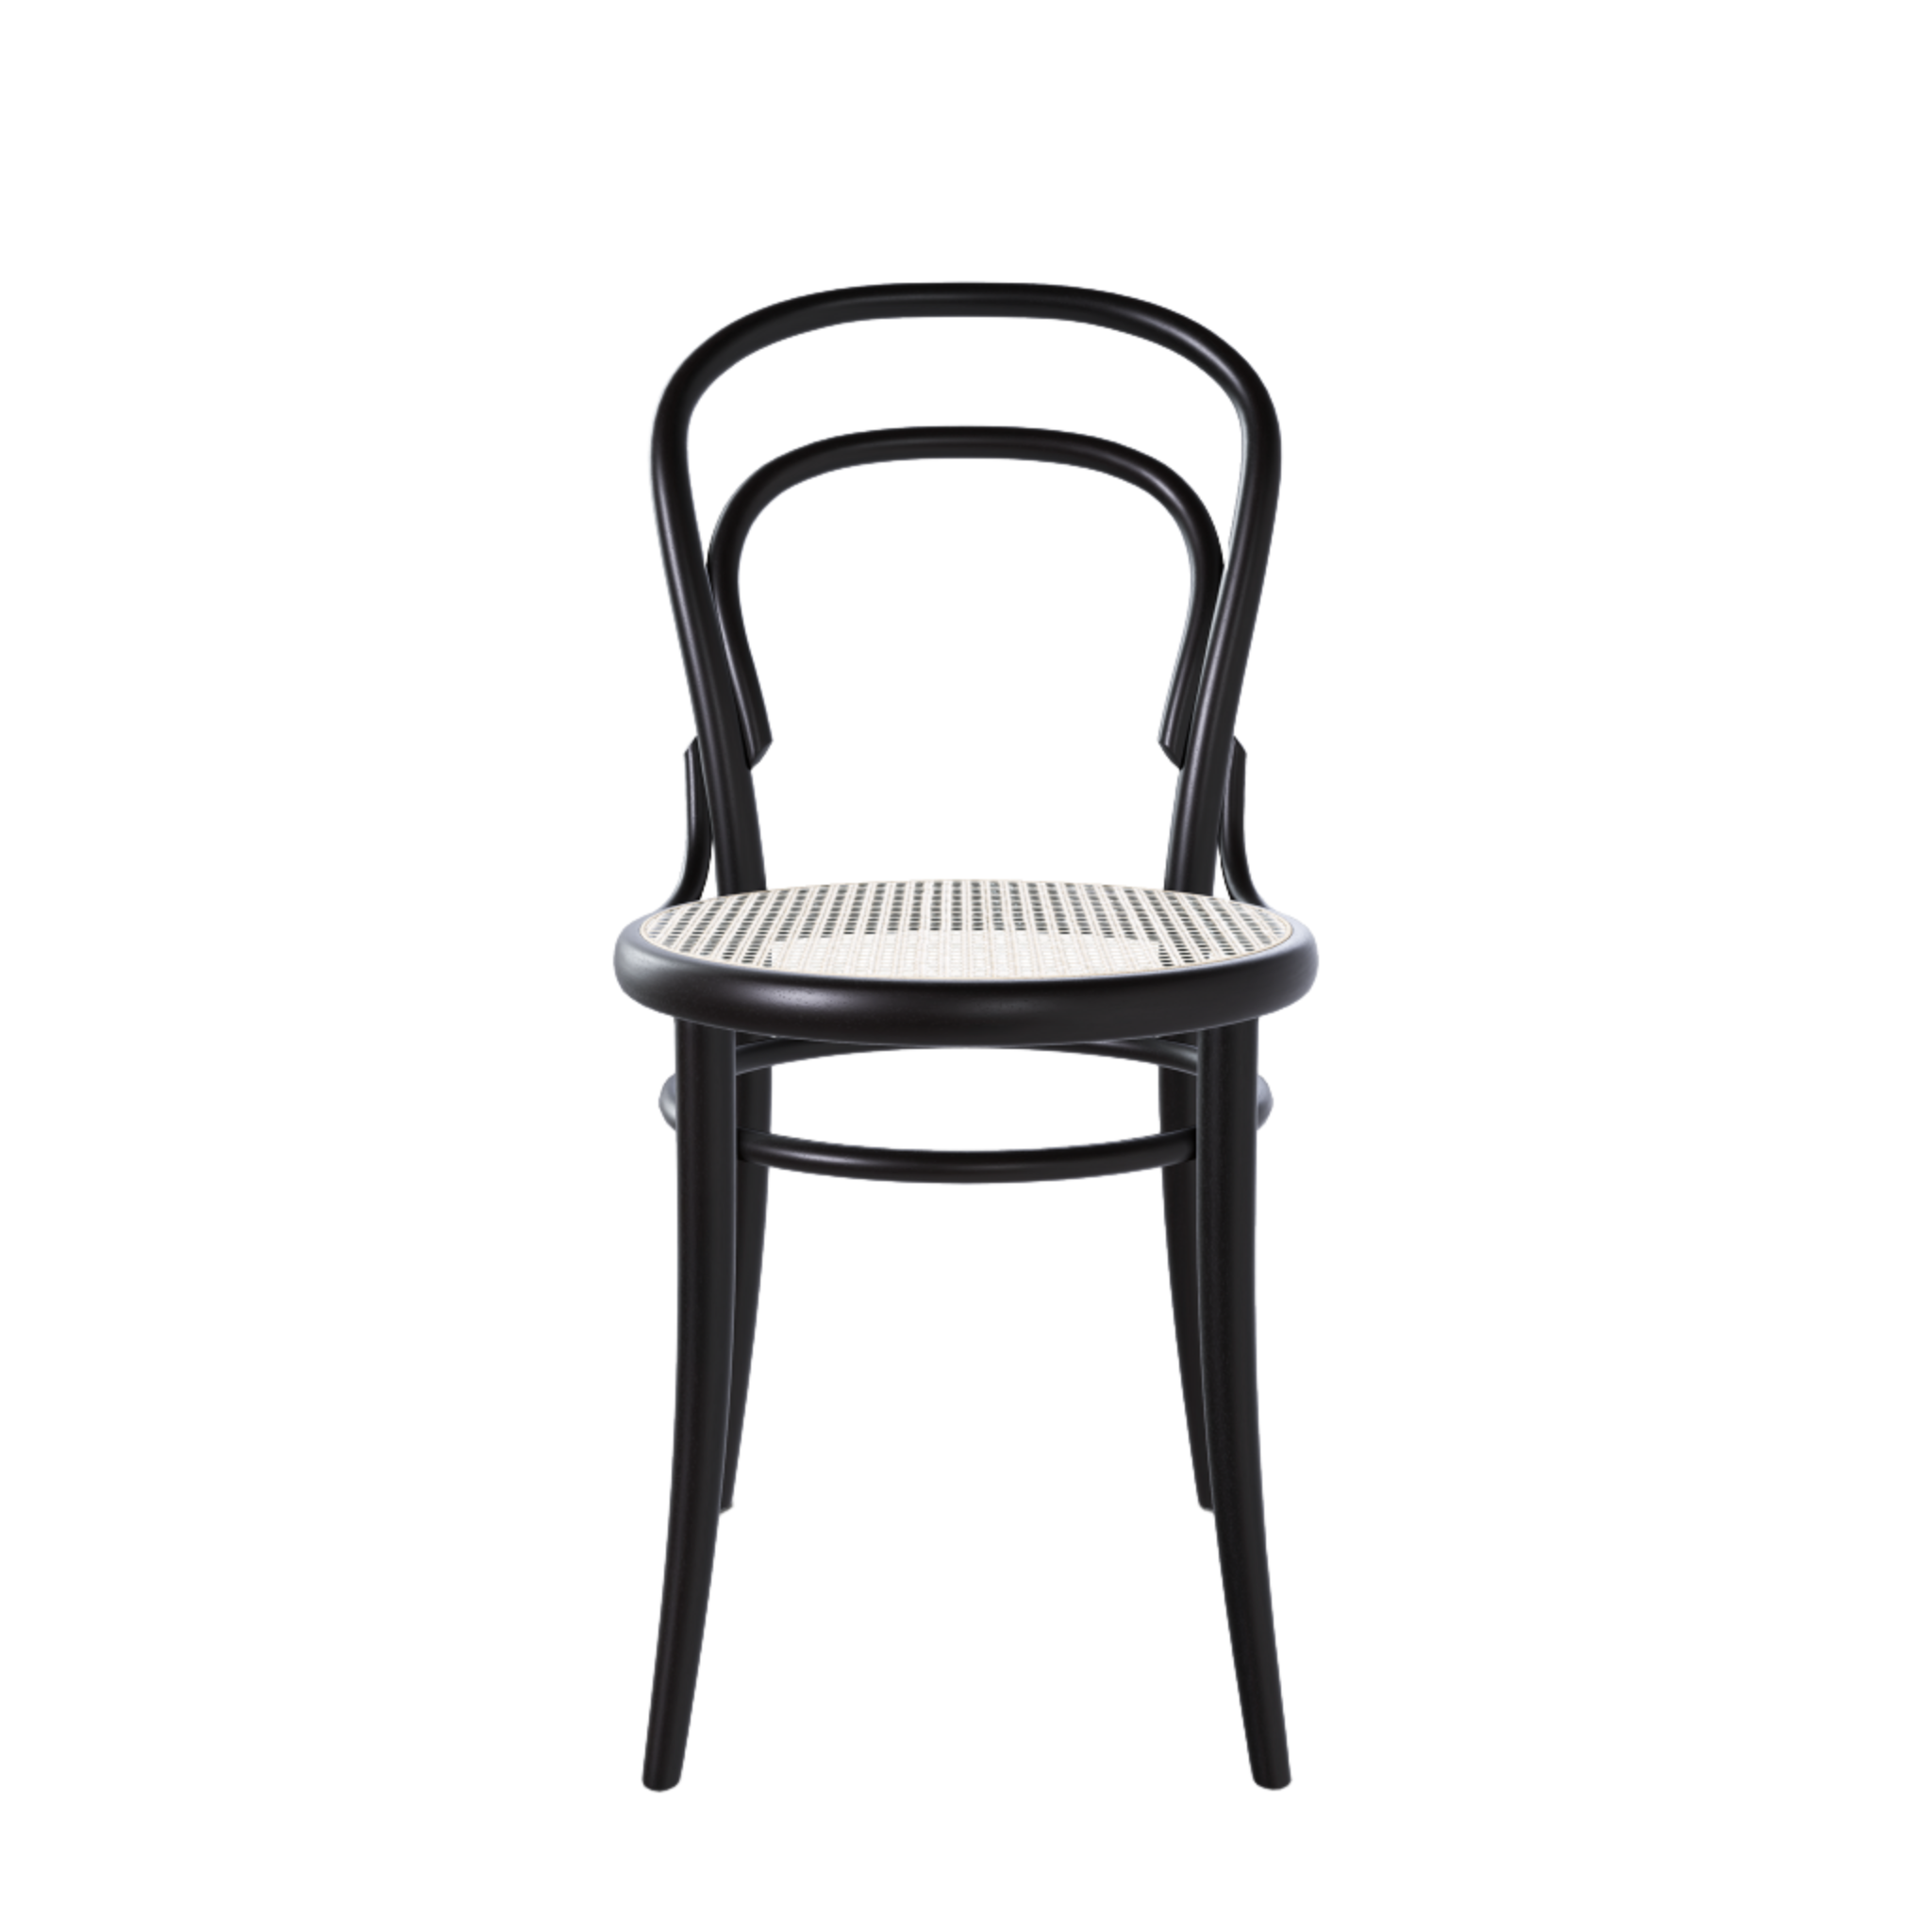 Ton 14 Dining Chair with cane seat in dark wenge